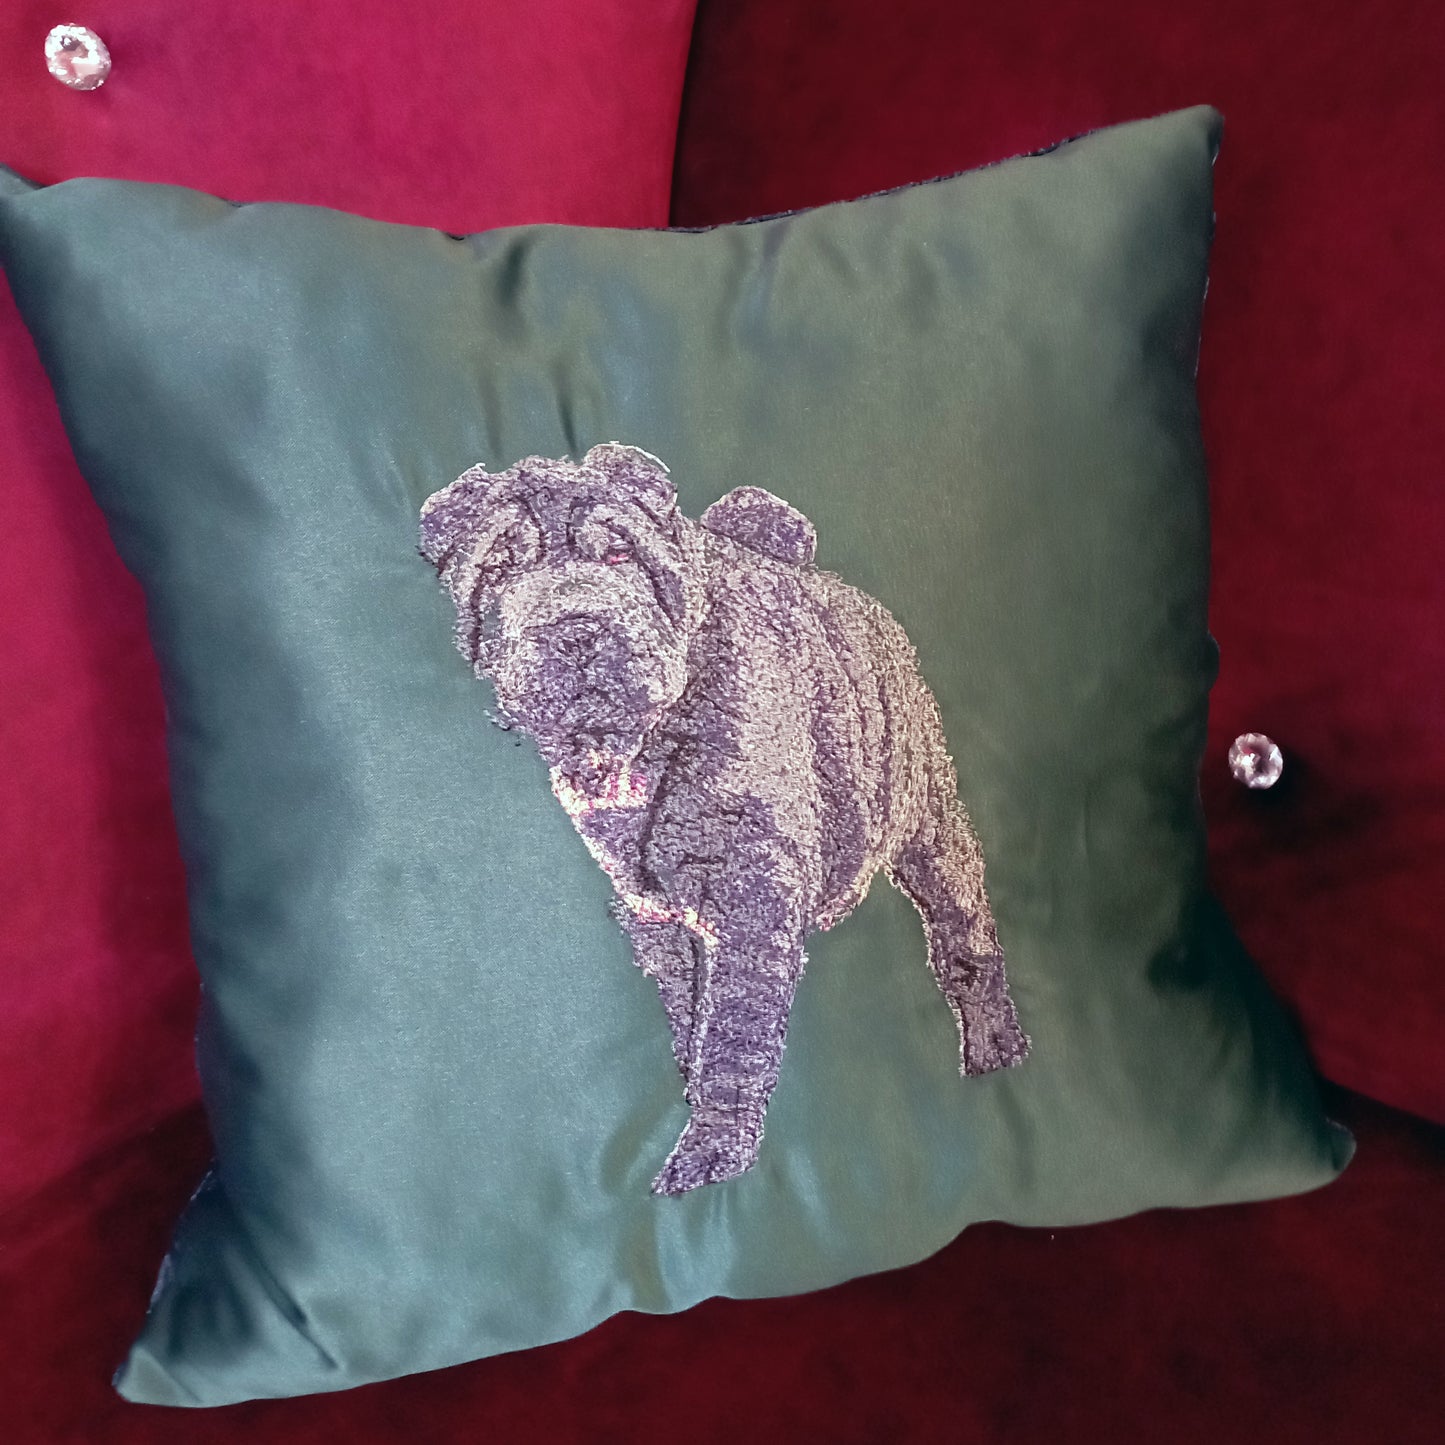 Custom emboidered pet pillow / personalized pillow